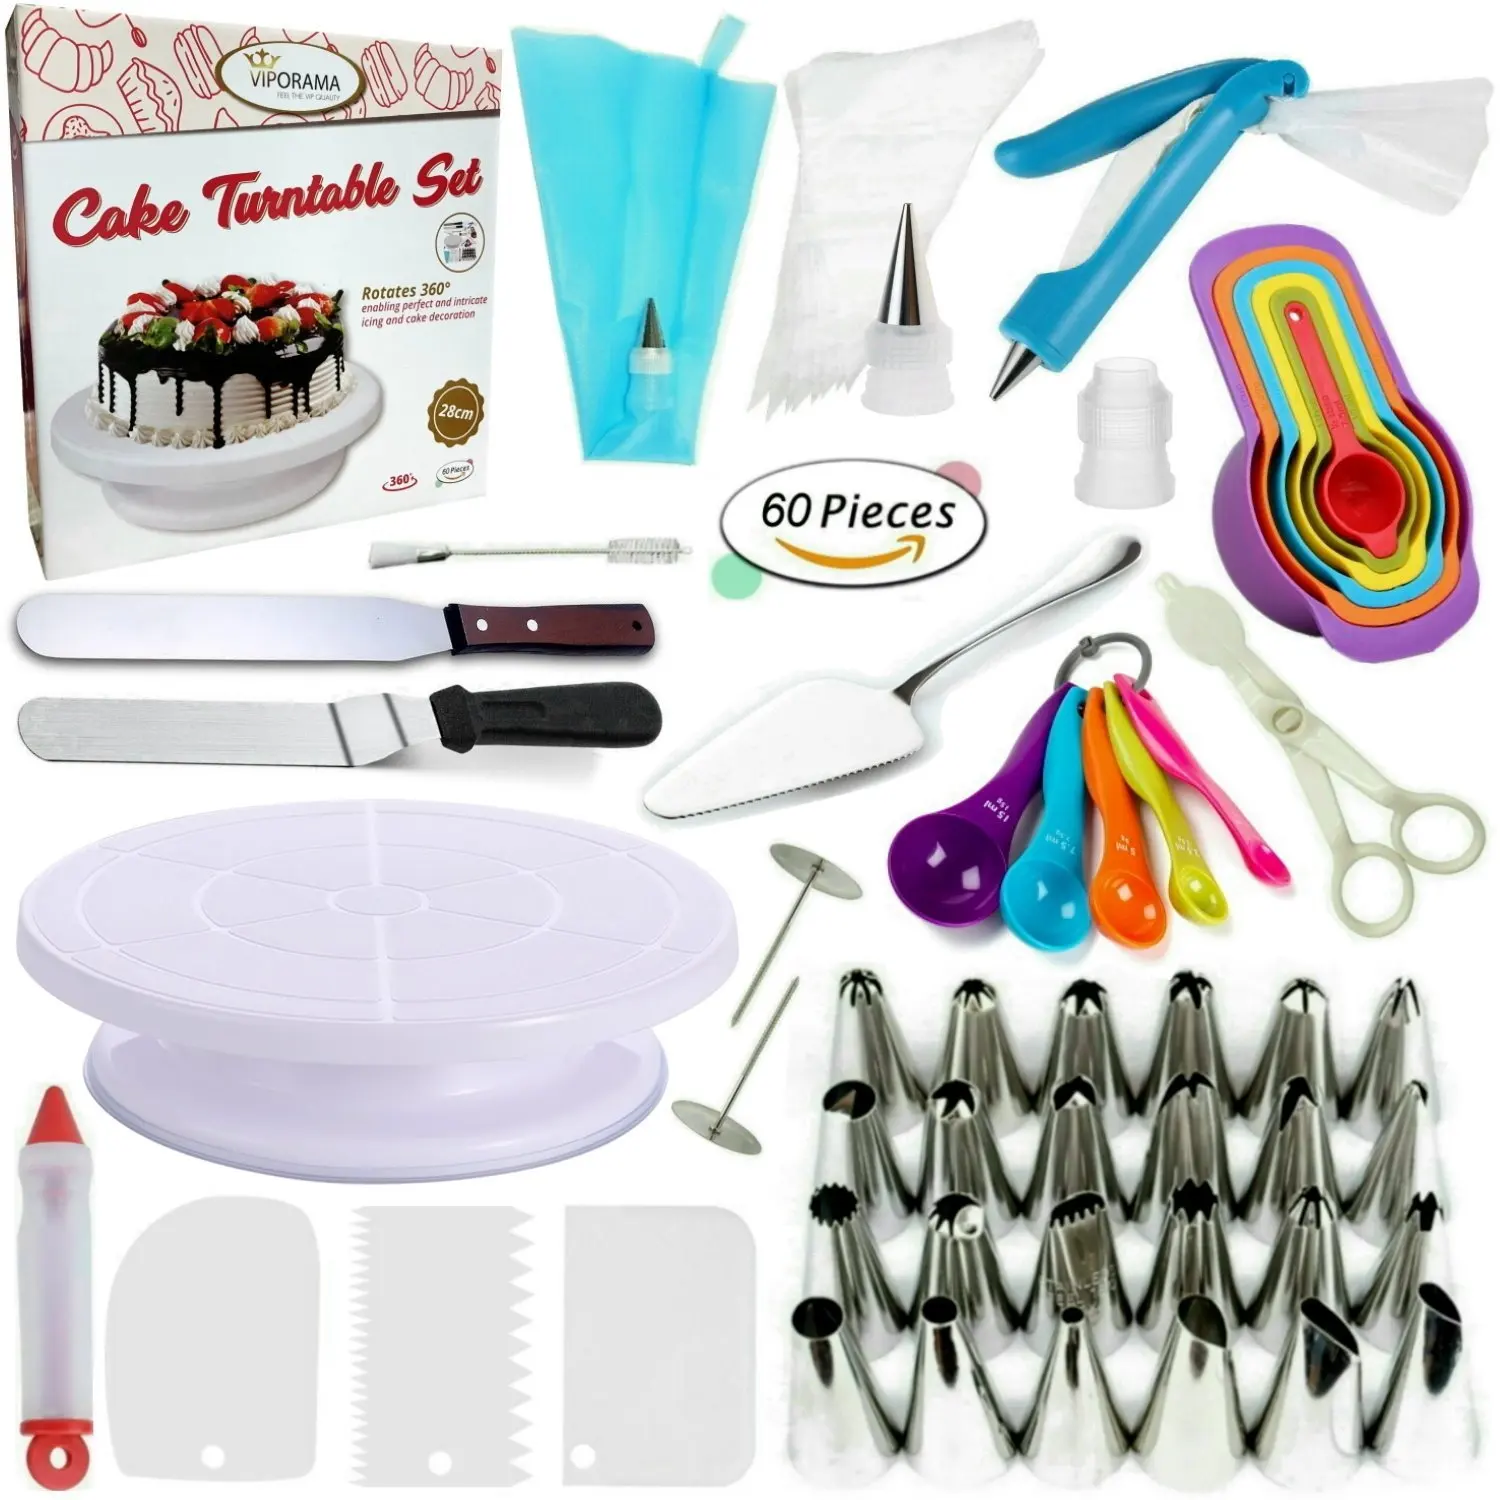 

2020 Hot Sale 60pcs Cake Decorating set baking tools rotating Cake stand turntable Supplies plastic cake stand, Picture